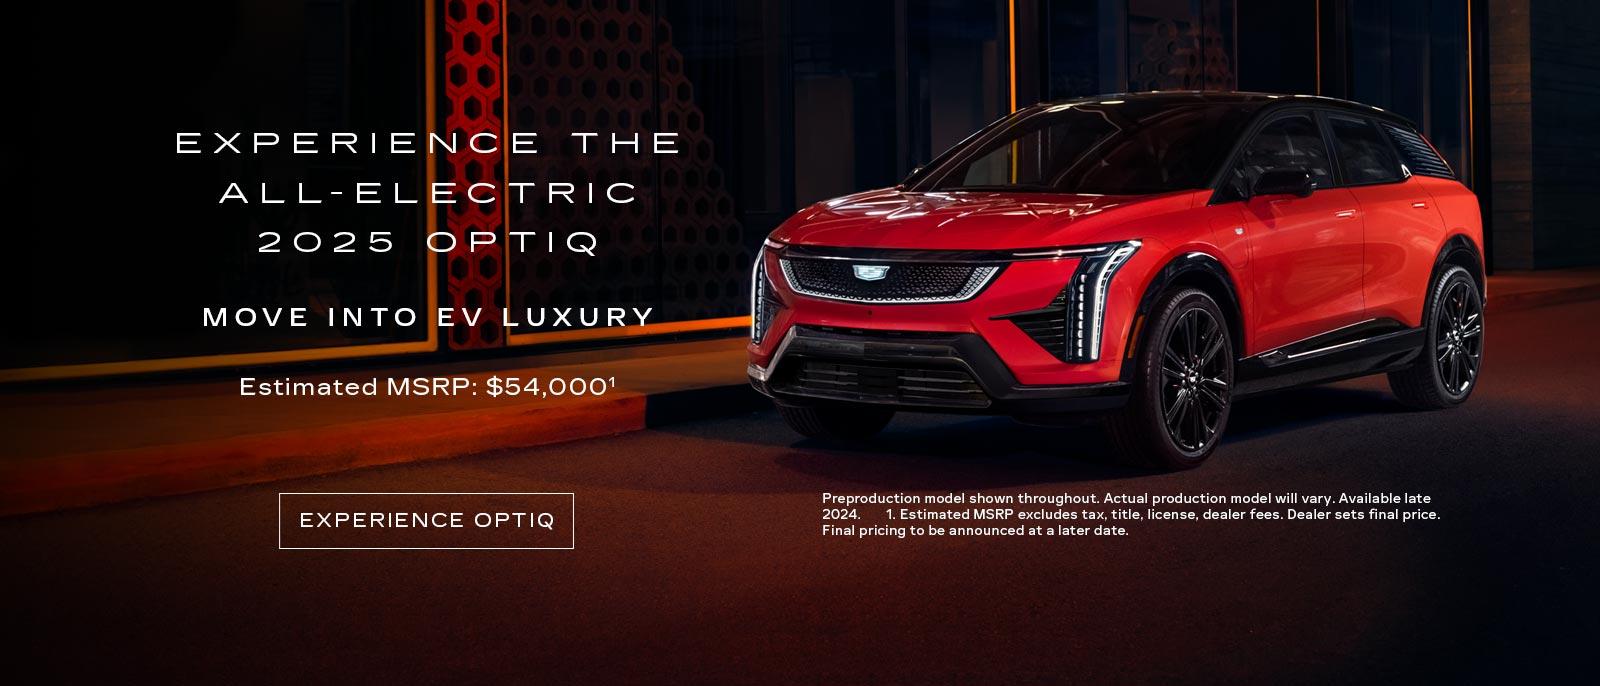 Experience the all electric 2025 OPTIQ. Move into EV luxury. Estimated MSRP $54,000